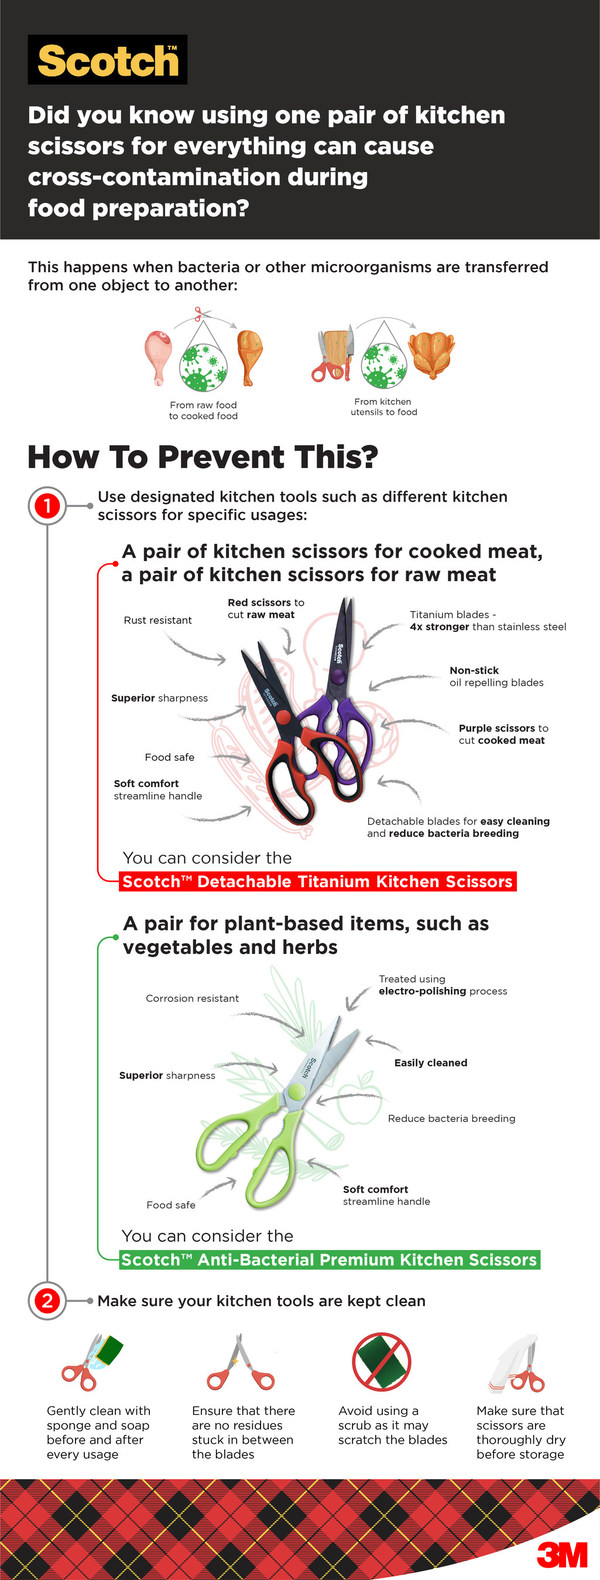 Did you know using one pair of kitchen scissors for everything can cause cross-contamination during food preparation?